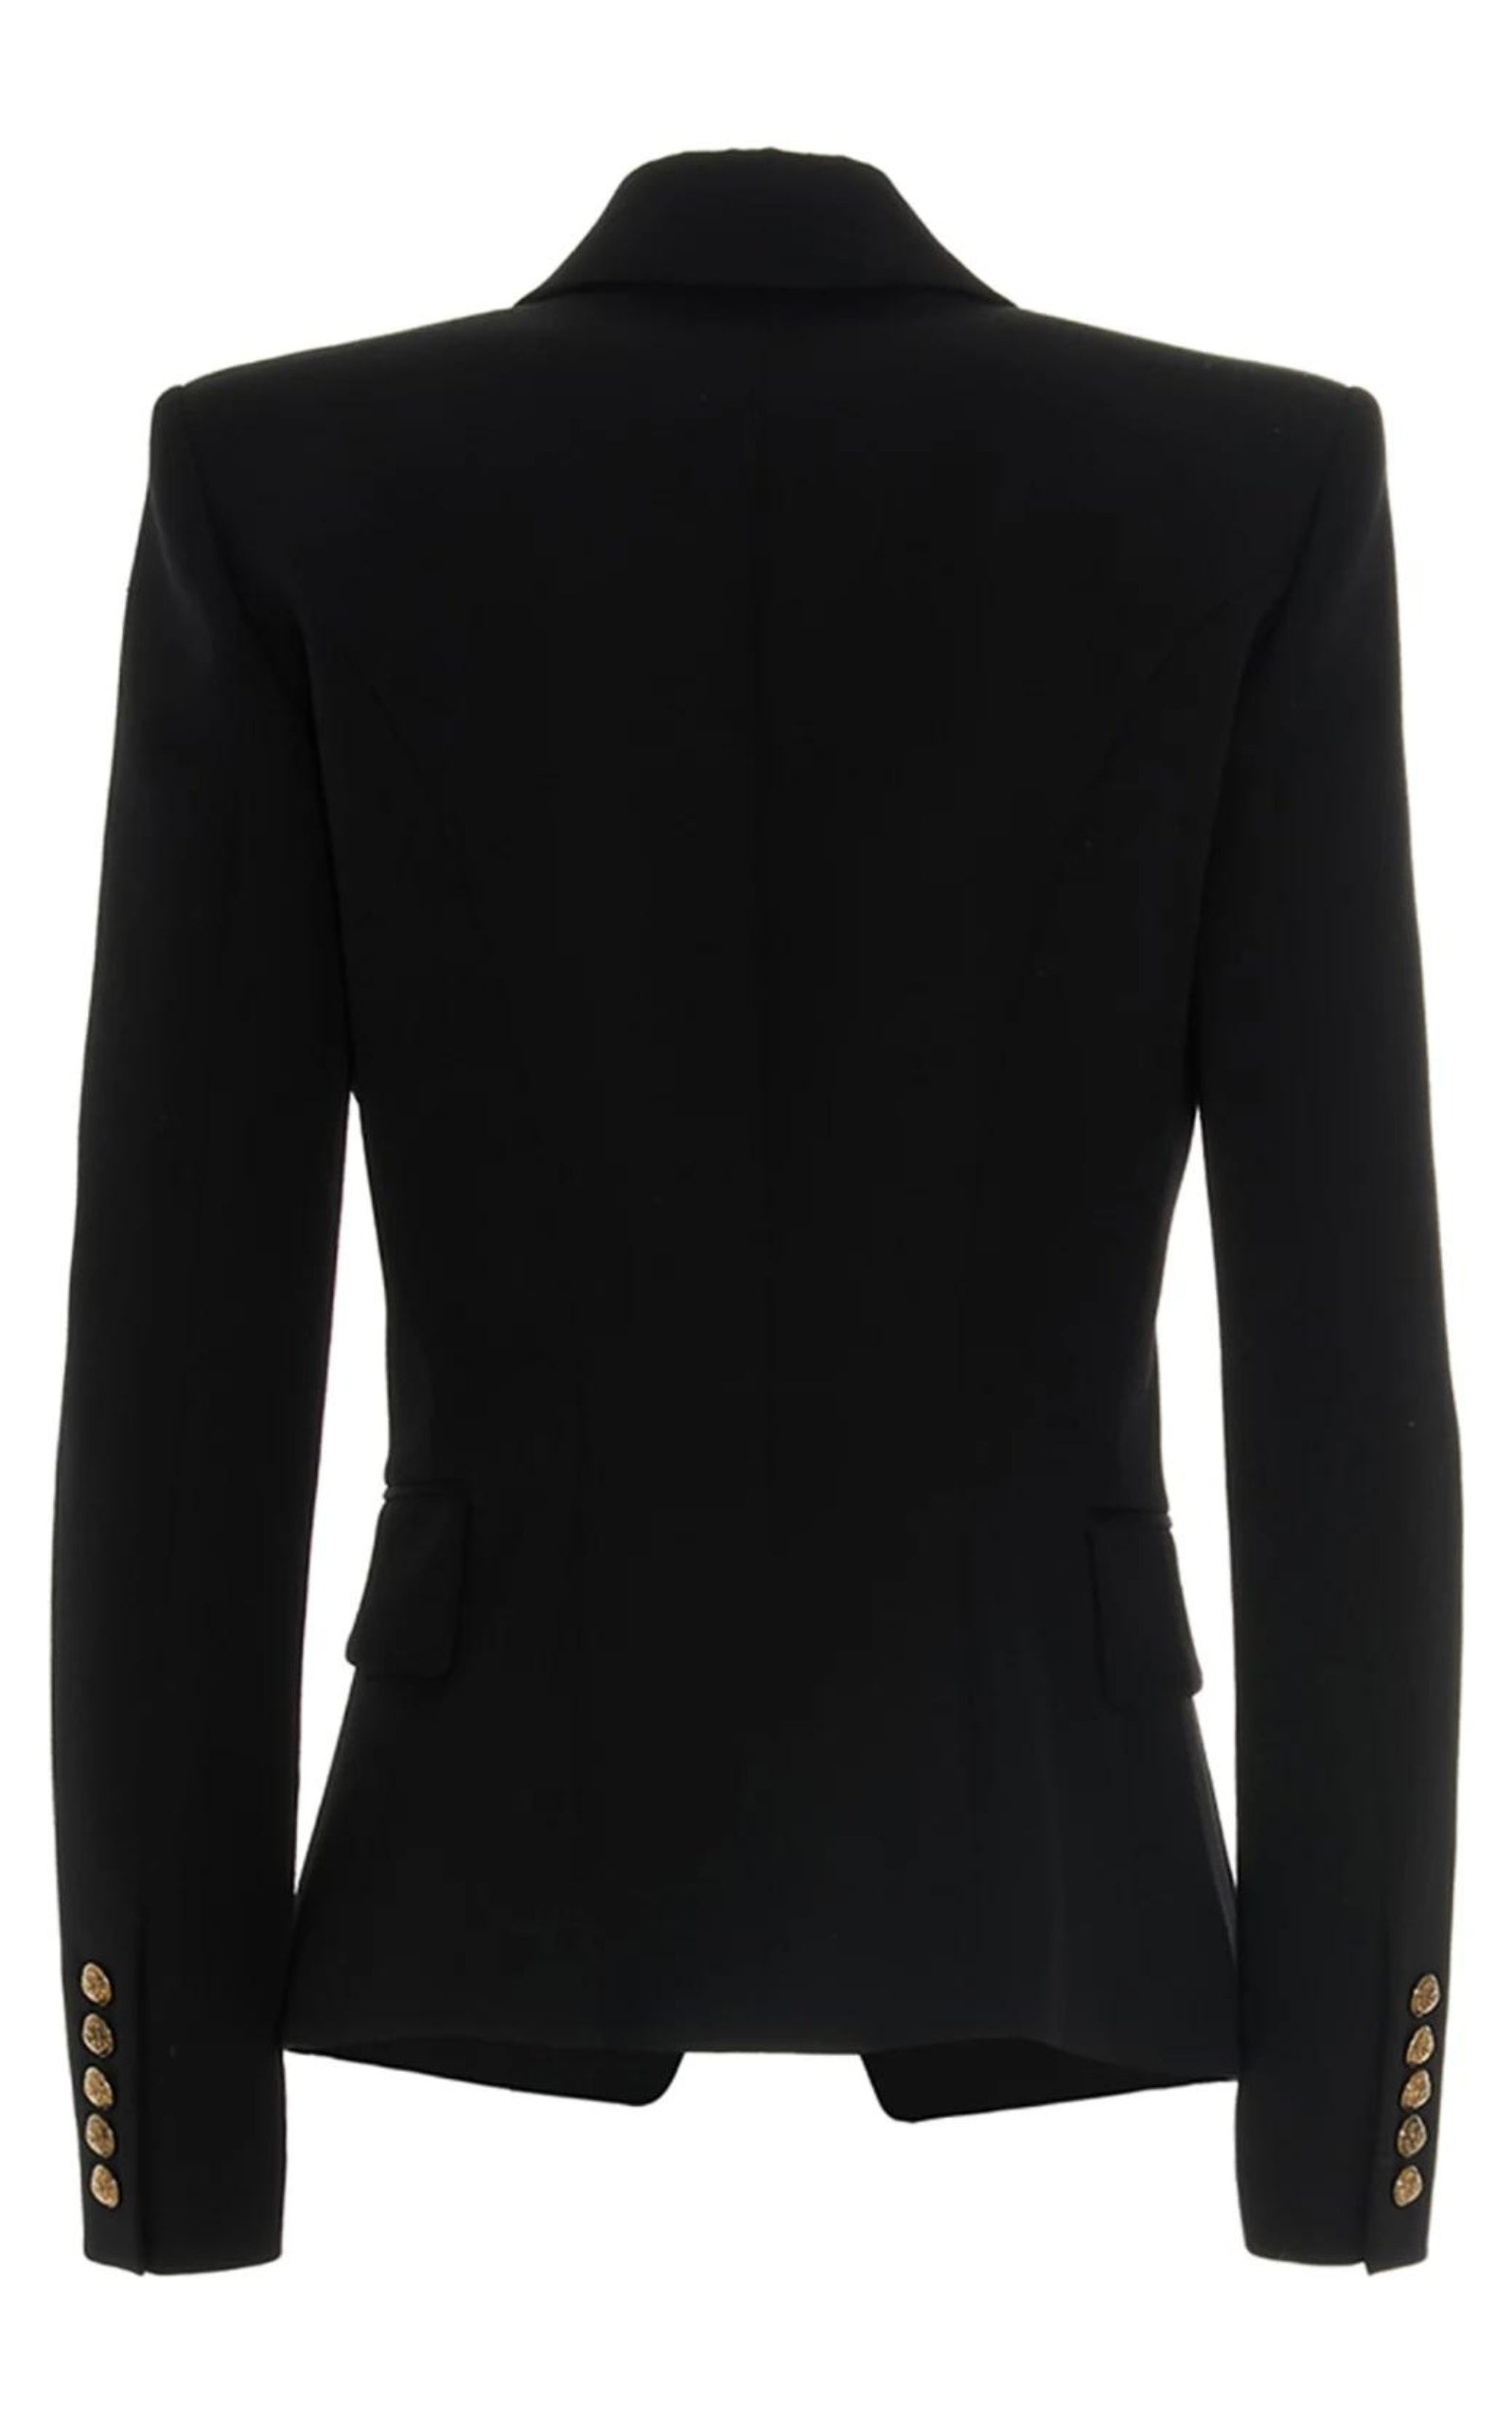 Black Wool Classic Double-Breasted Blazer Jacket - 5